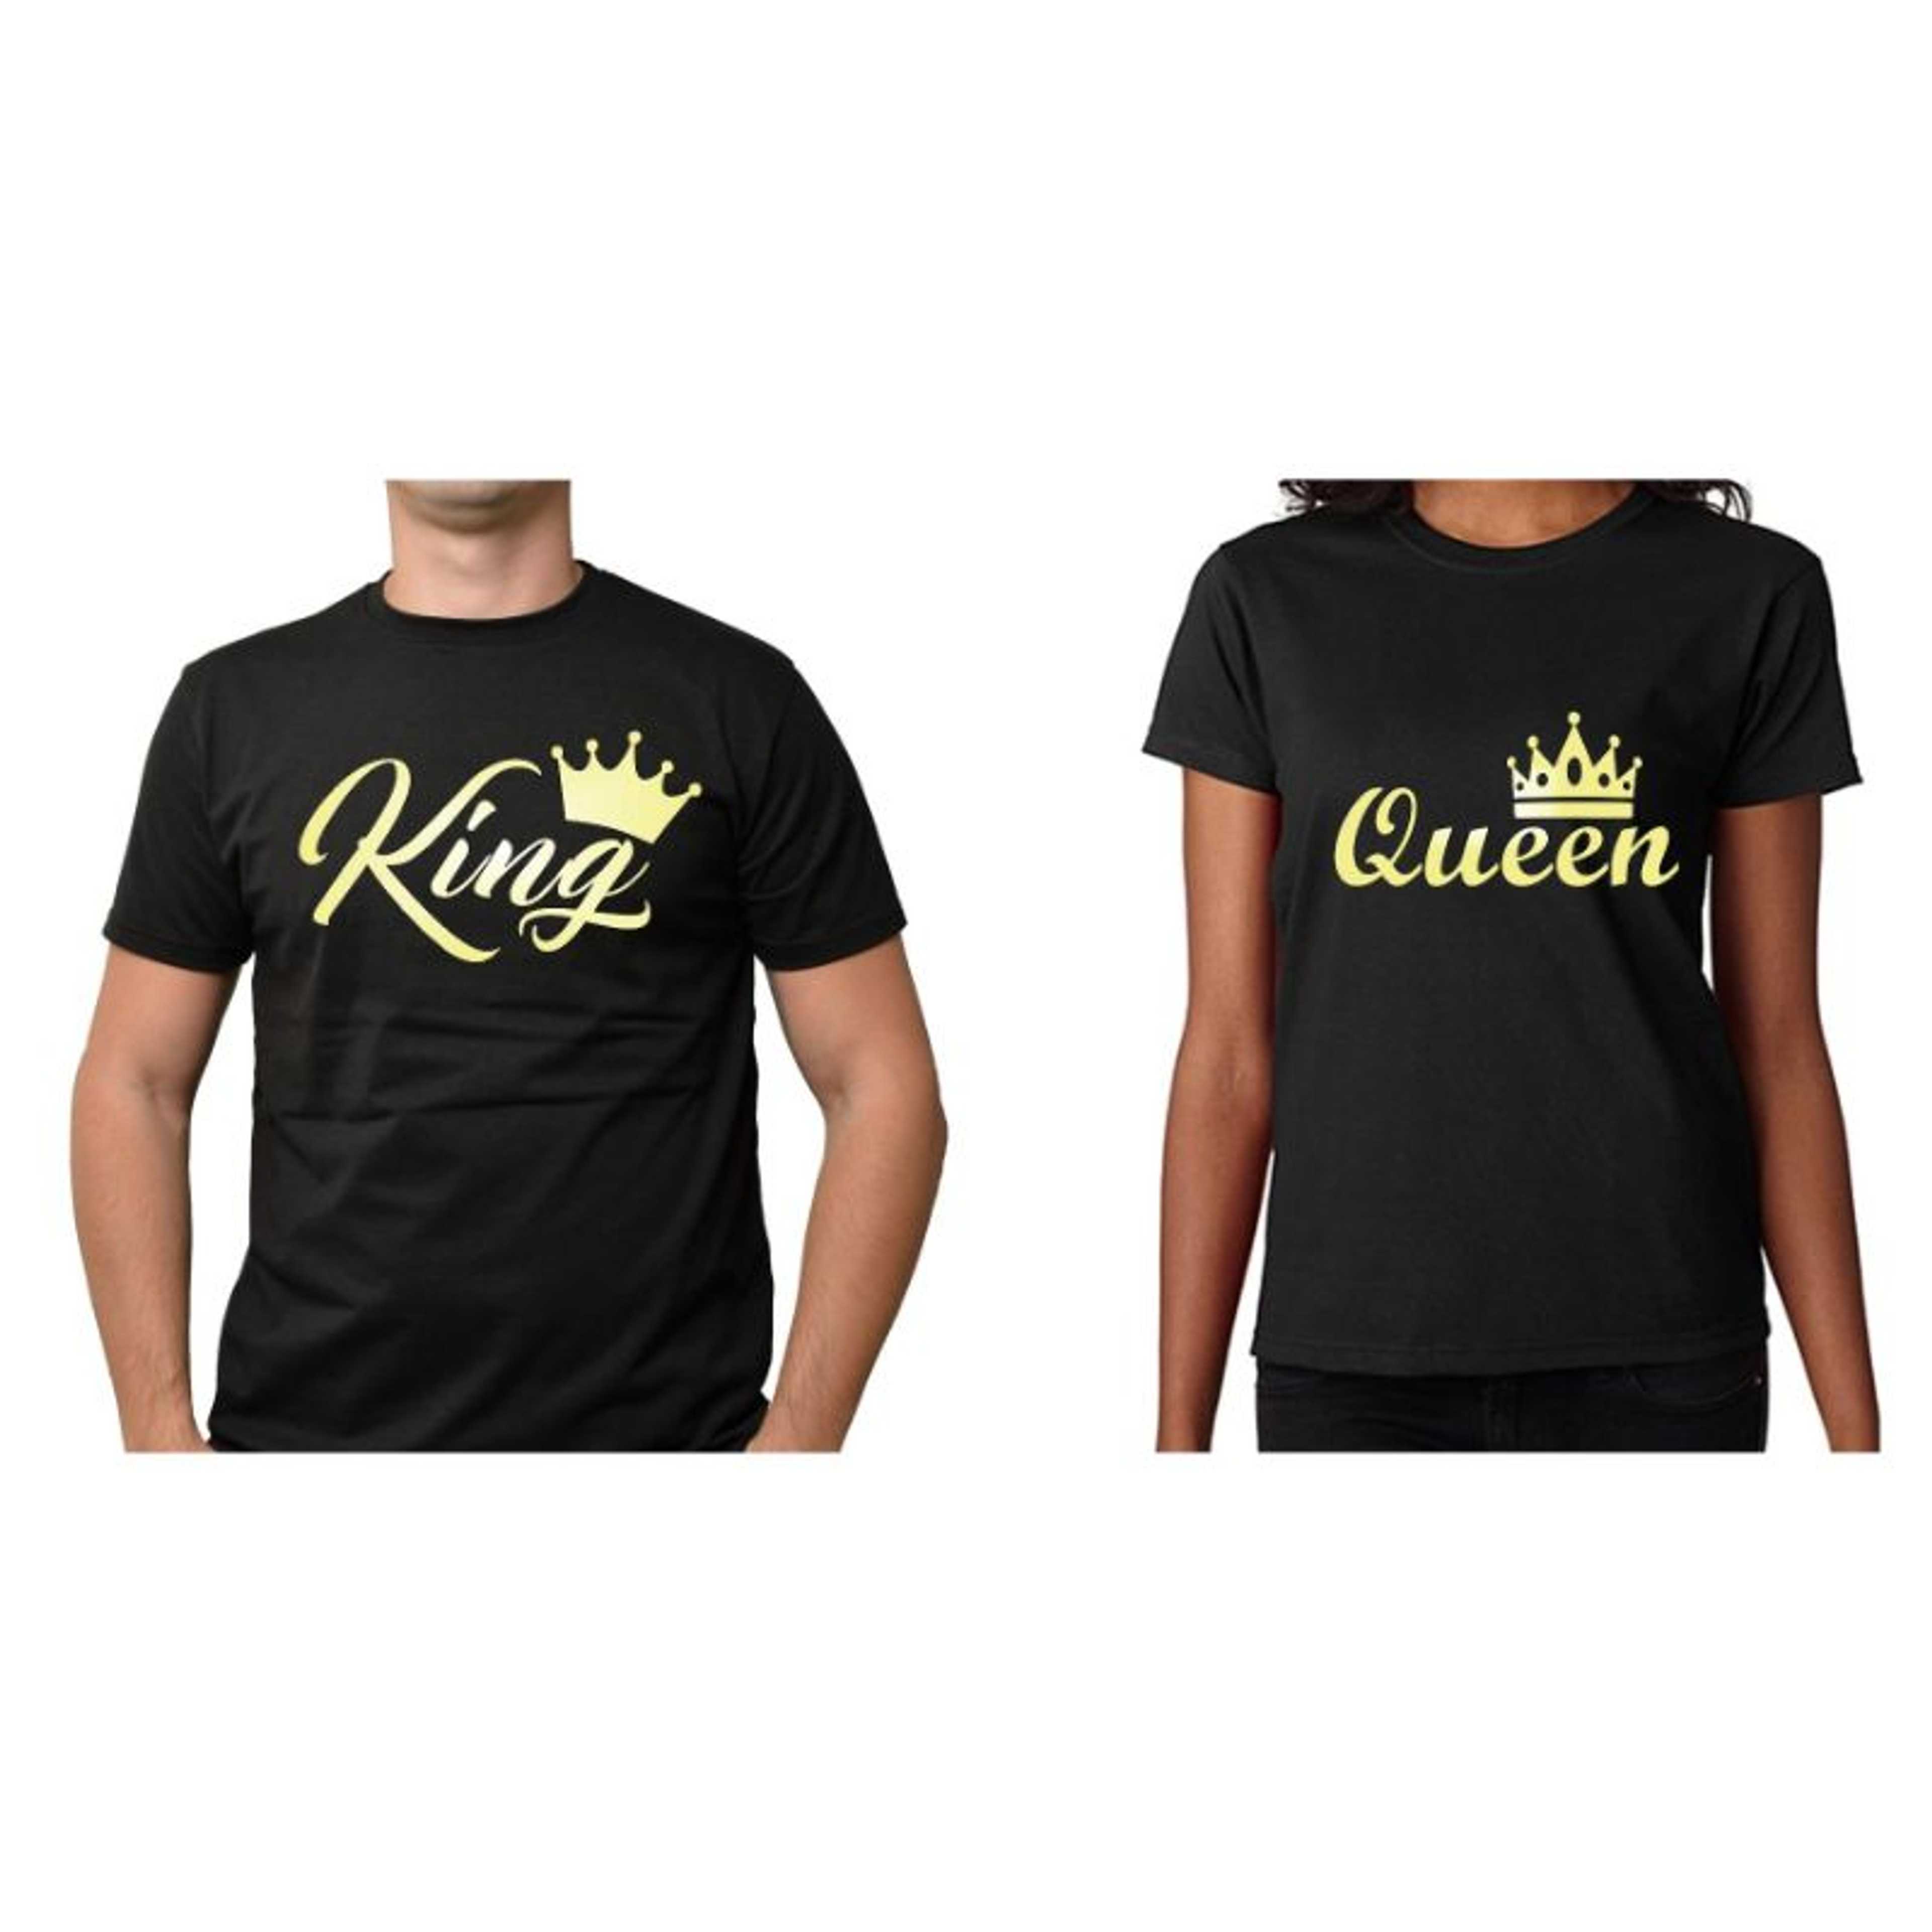 Pack of 2 Round Neck Black T-Shirt King and Queen Printed